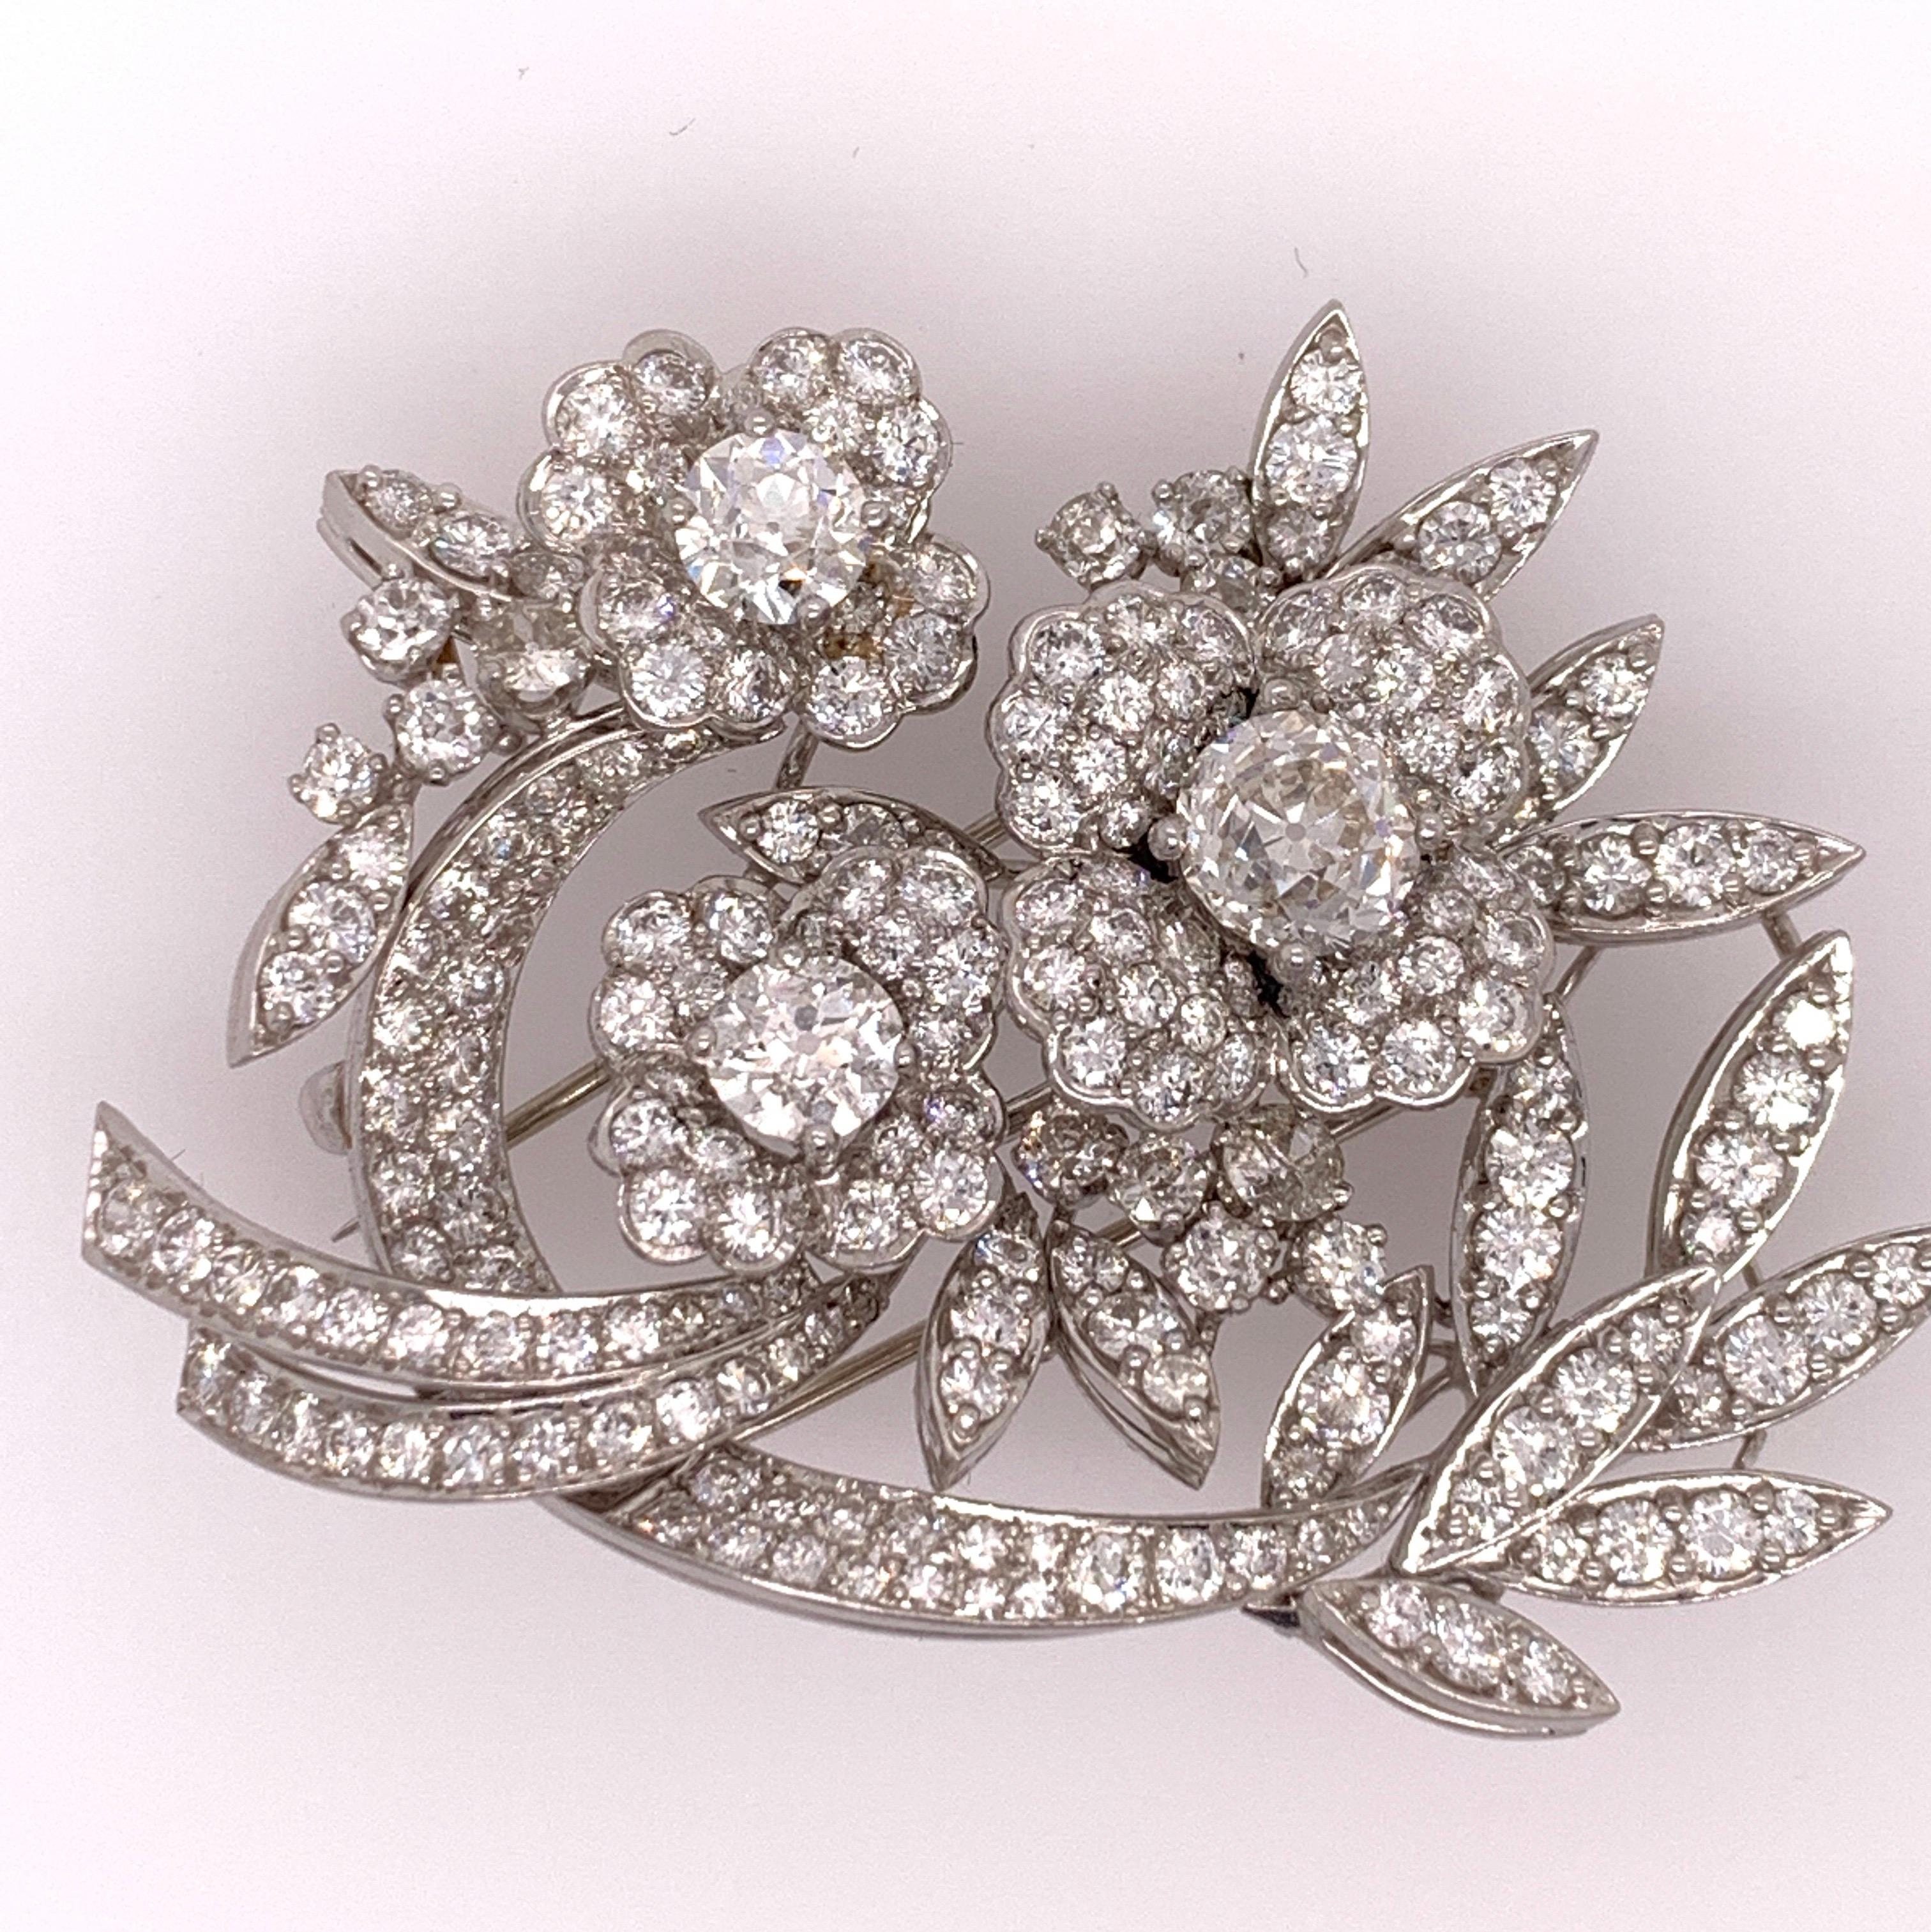 

Magnificent Rare Estate Platinum Brooch & Pendant. Approximately 11 carats of Natural old euro and round diamonds, 216 stones total.

The piece weighs 35 grams, Can be worn as a pendant or a brooch. It is handmade in platinum, brooch and pendant